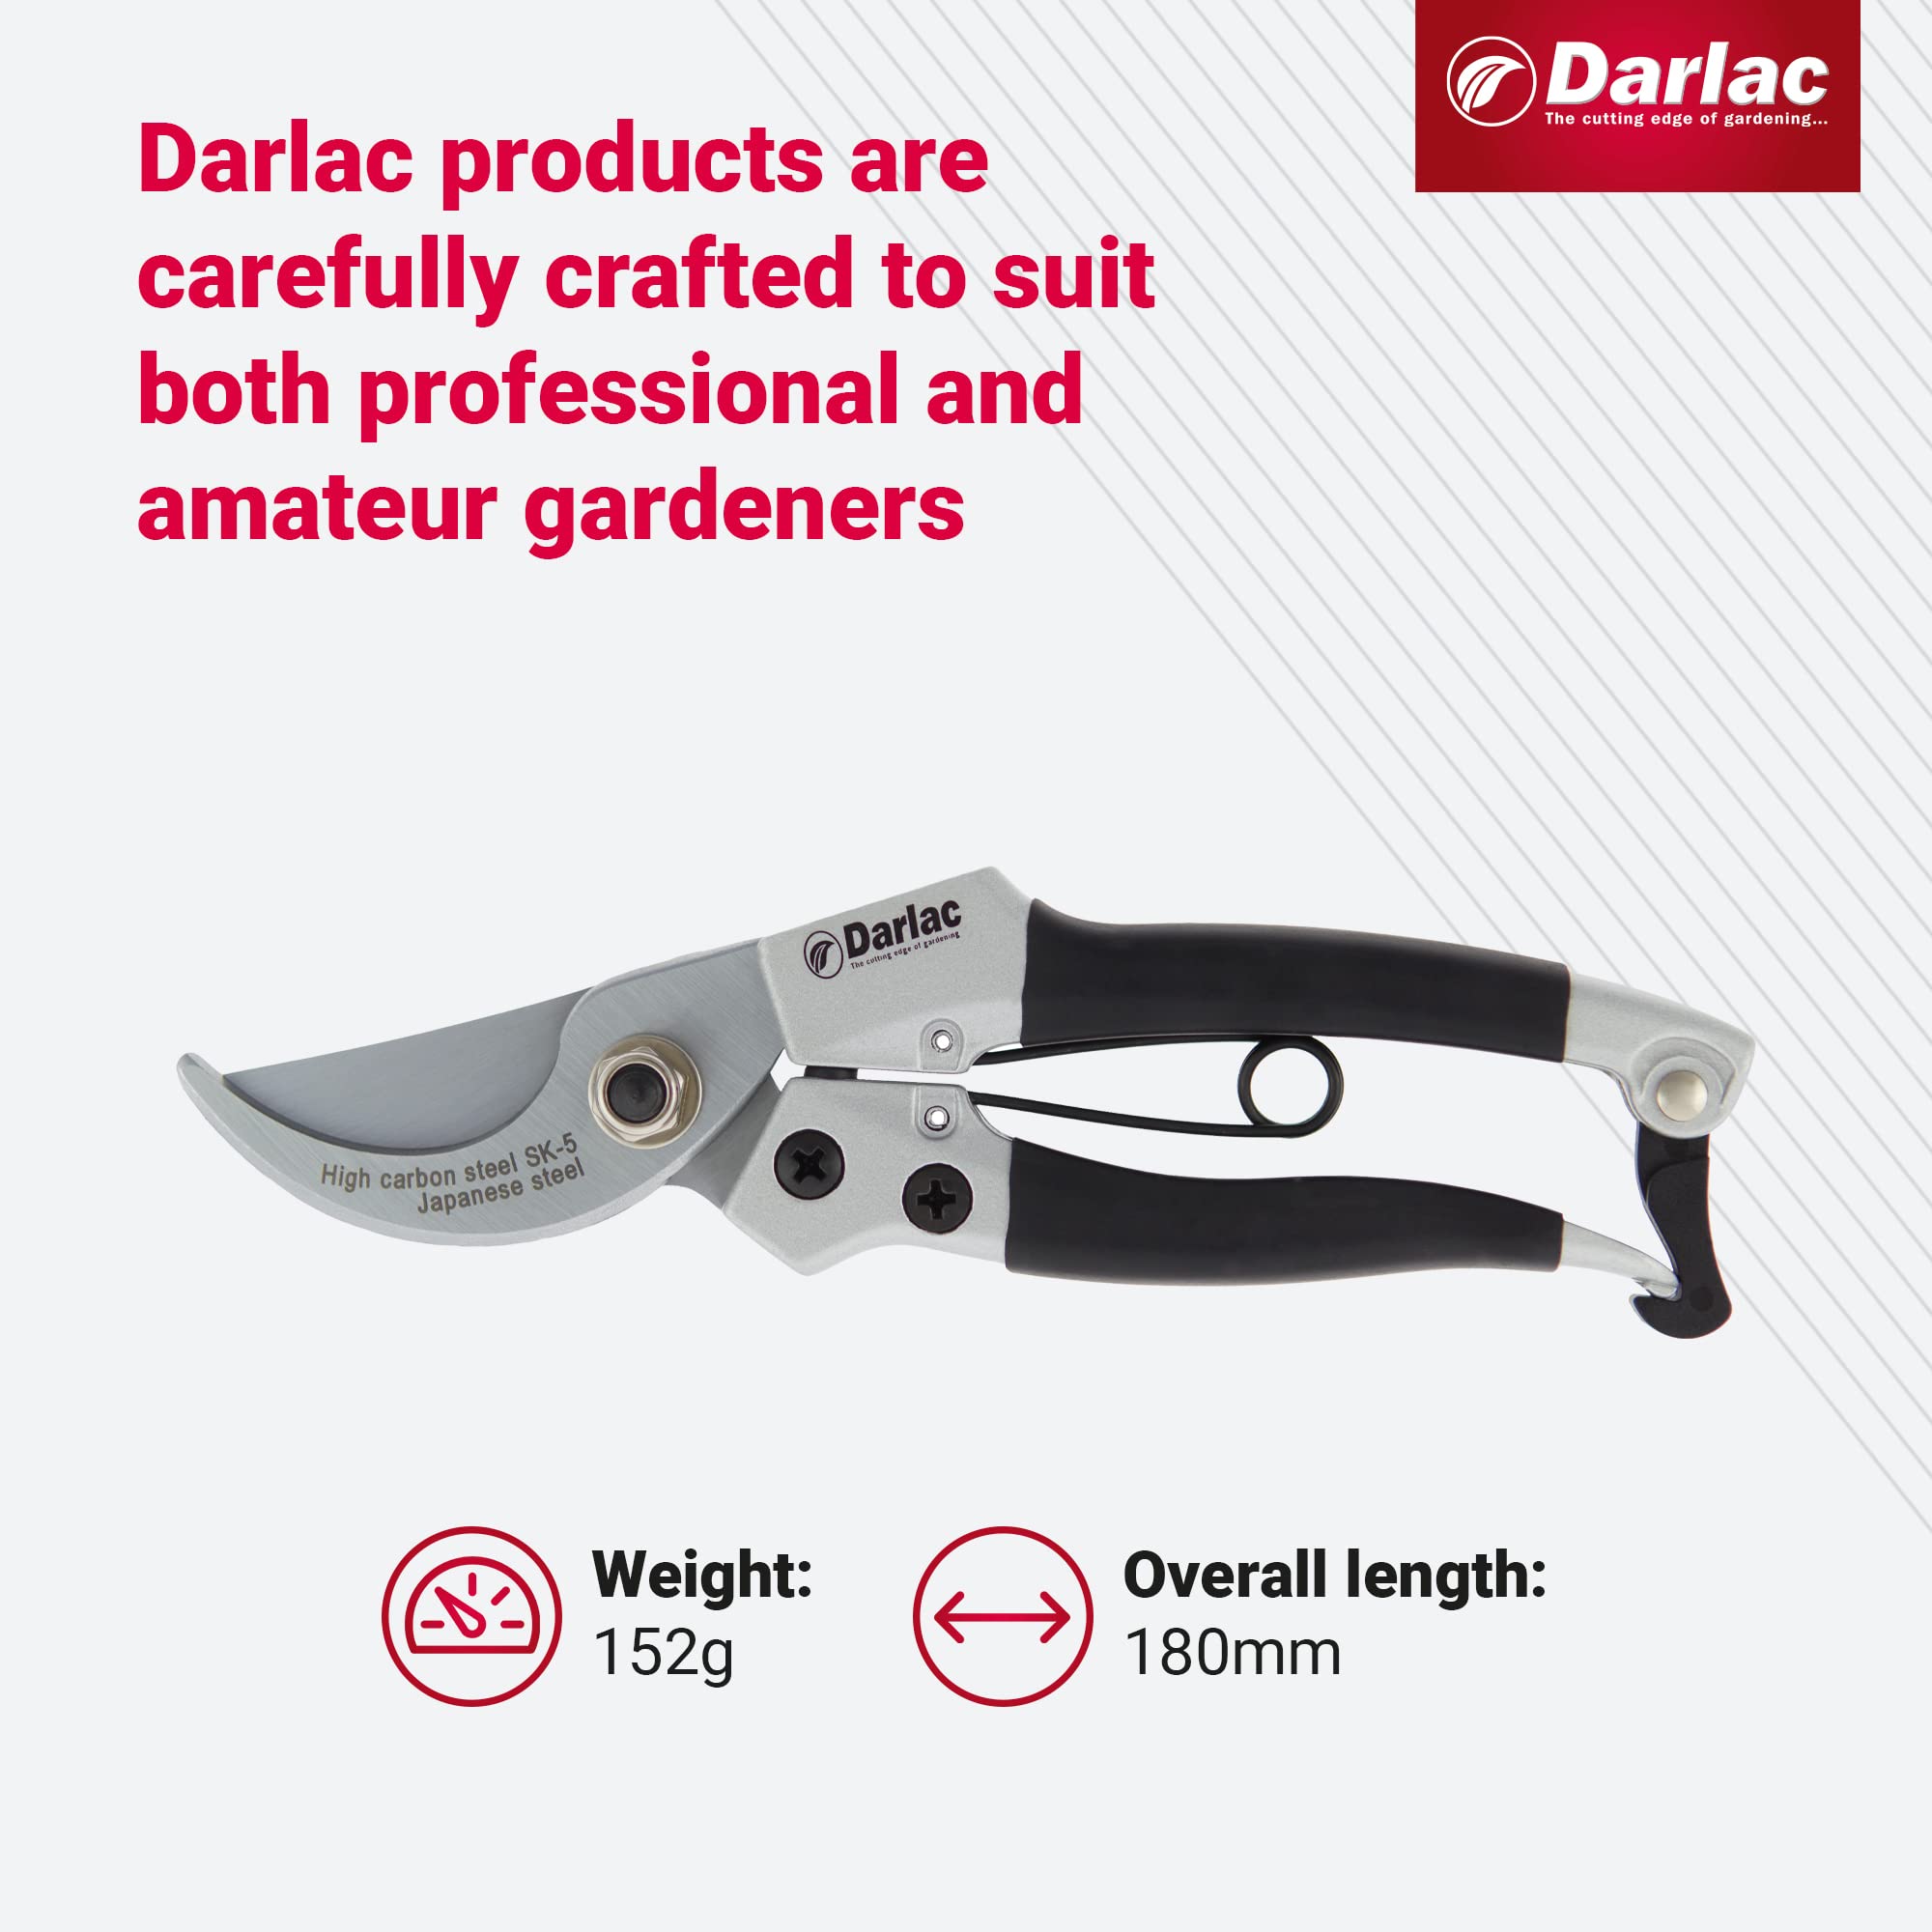 Darlac Compact Pruner - Razor-Sharp Bypass Pruners for General Pruning - 16mm - Lightweight Ideal for Fine Or Delicate Pruning and Small or Medium Hands - SK5 High Carbon Japanese Steel